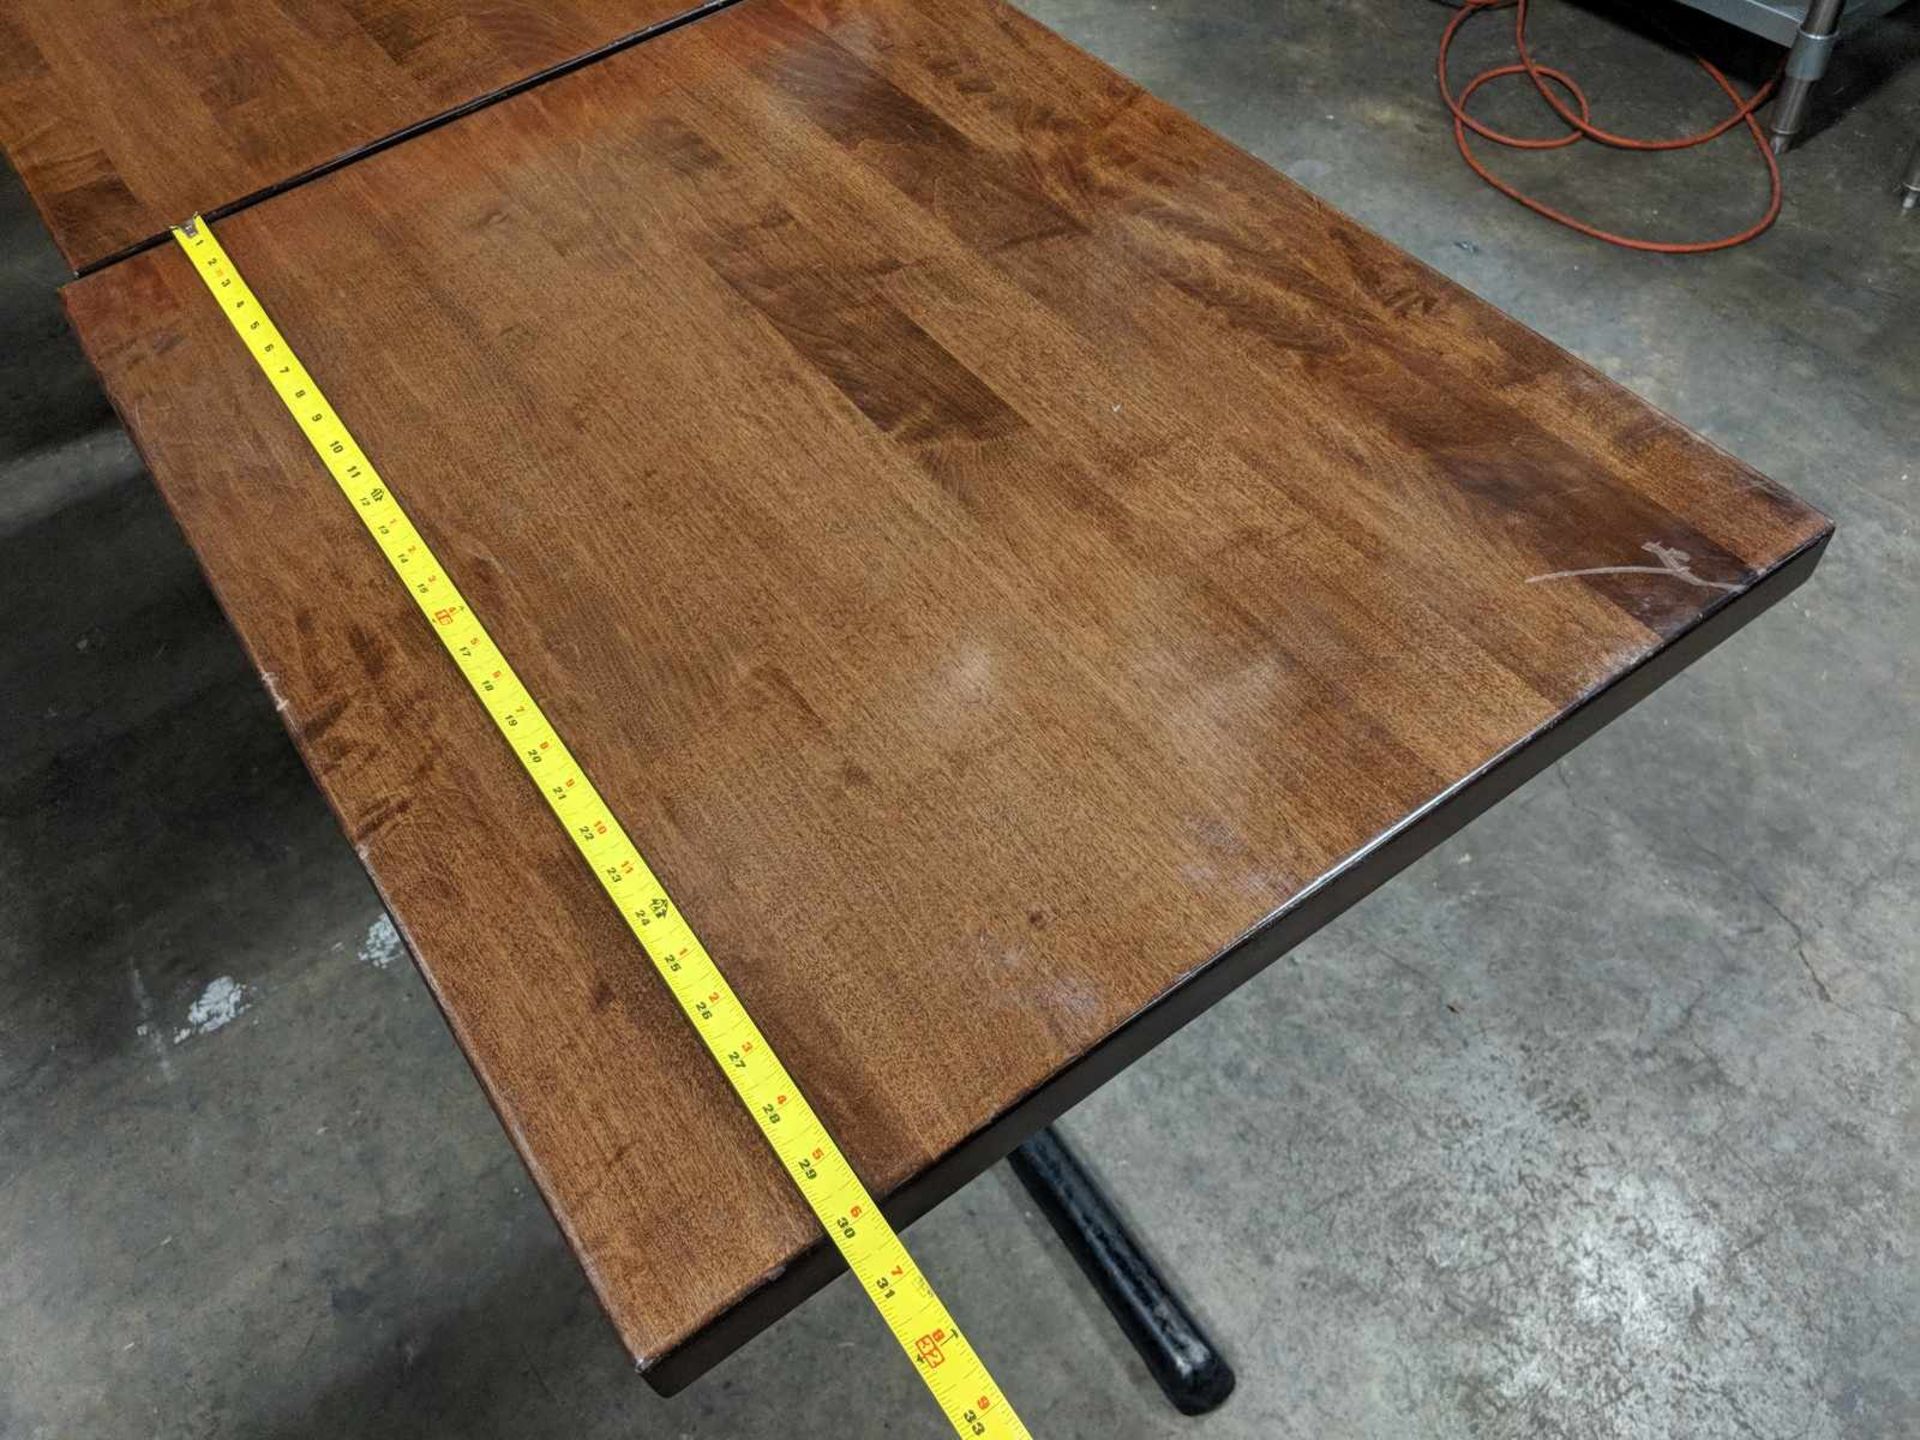 24" x 30" x 29.5" Solid Wood Tables - Lot of 2 - Image 3 of 5